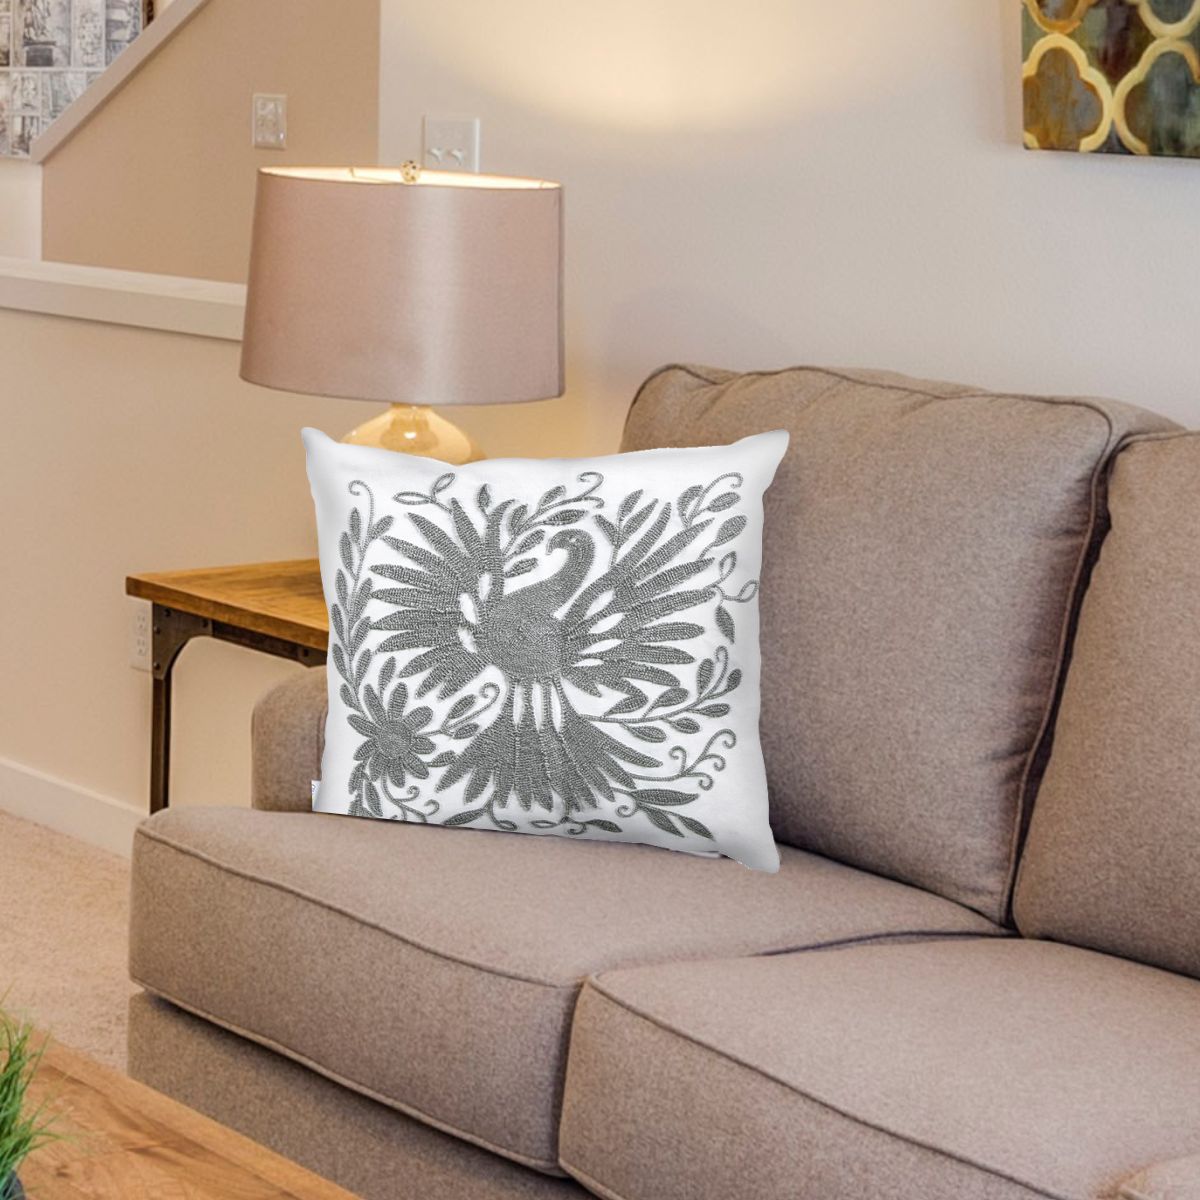 Grey Beautiful Bird Embroidered Cushion Cover